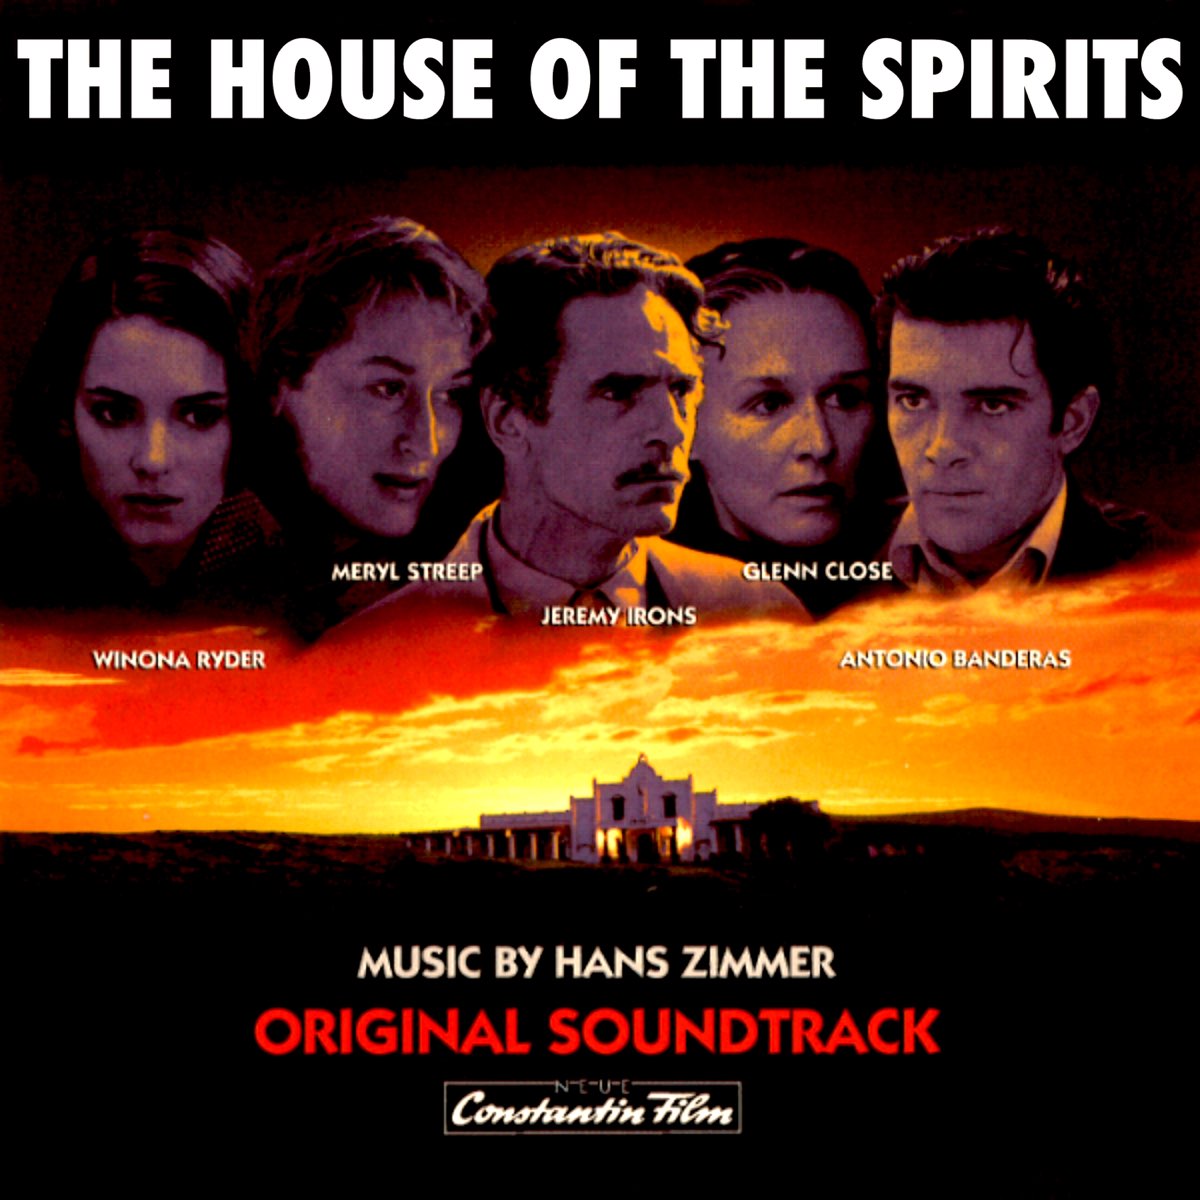 The House of the Spirits. Hans Zimmer альбомы. "The House of the Spirits 215. Dune Original Motion picture Soundtrack Hans Zimmer обложка альбома. House soundtracks